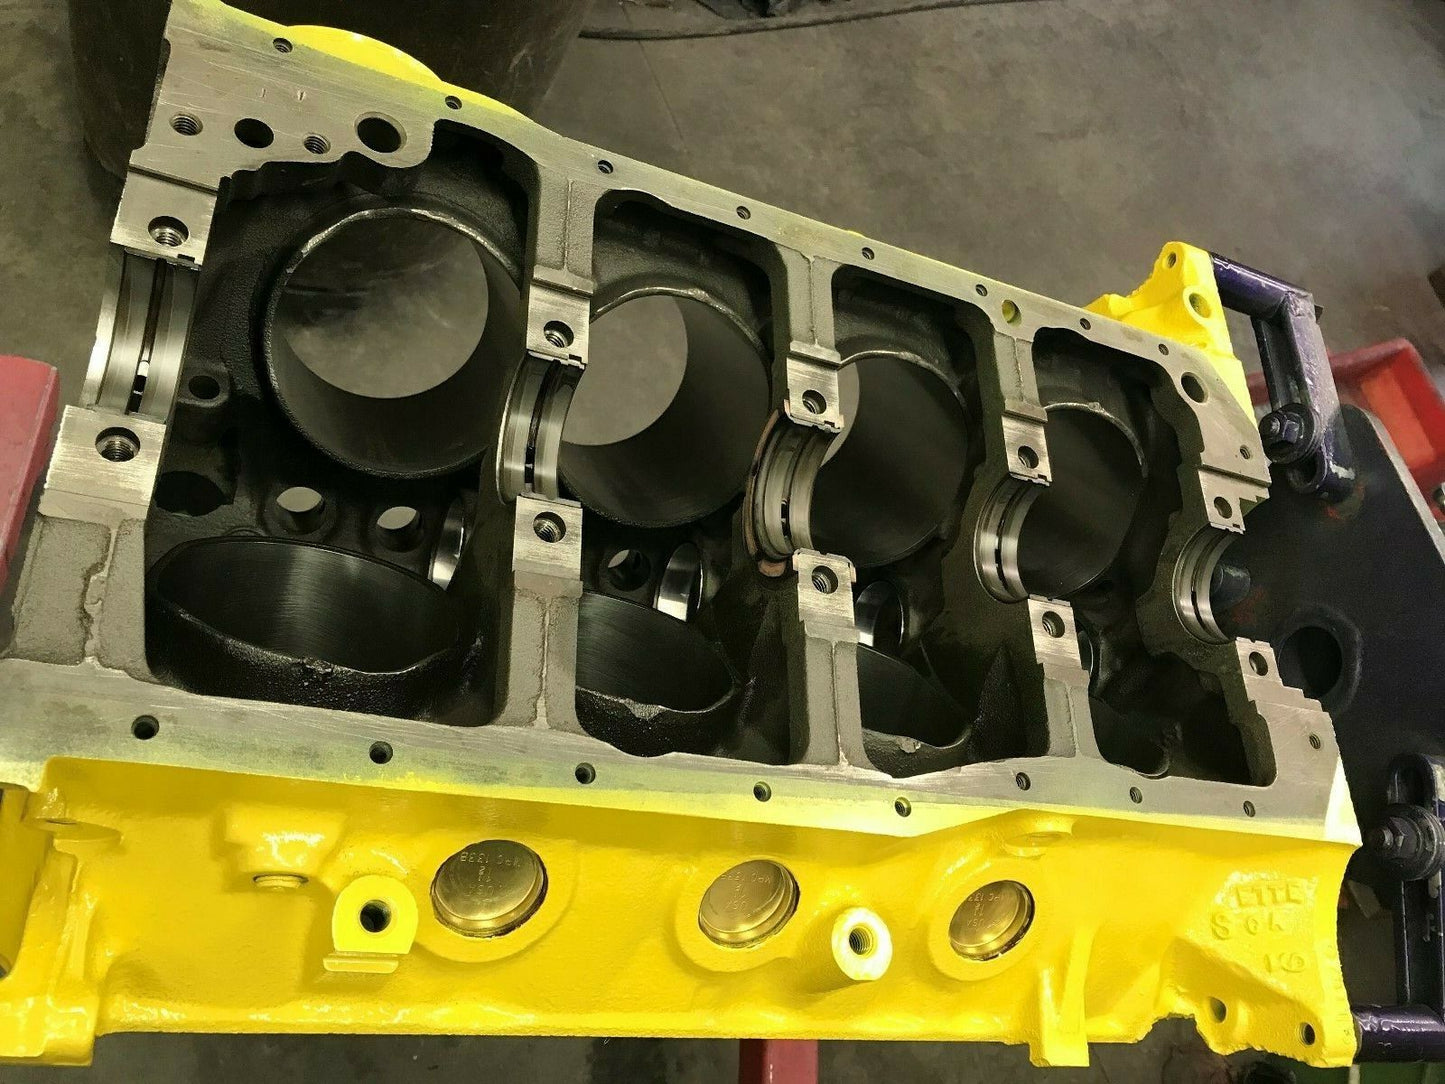 302 ,347, 331ci Ford Bare block,race prep, free shipping, ready for your parts